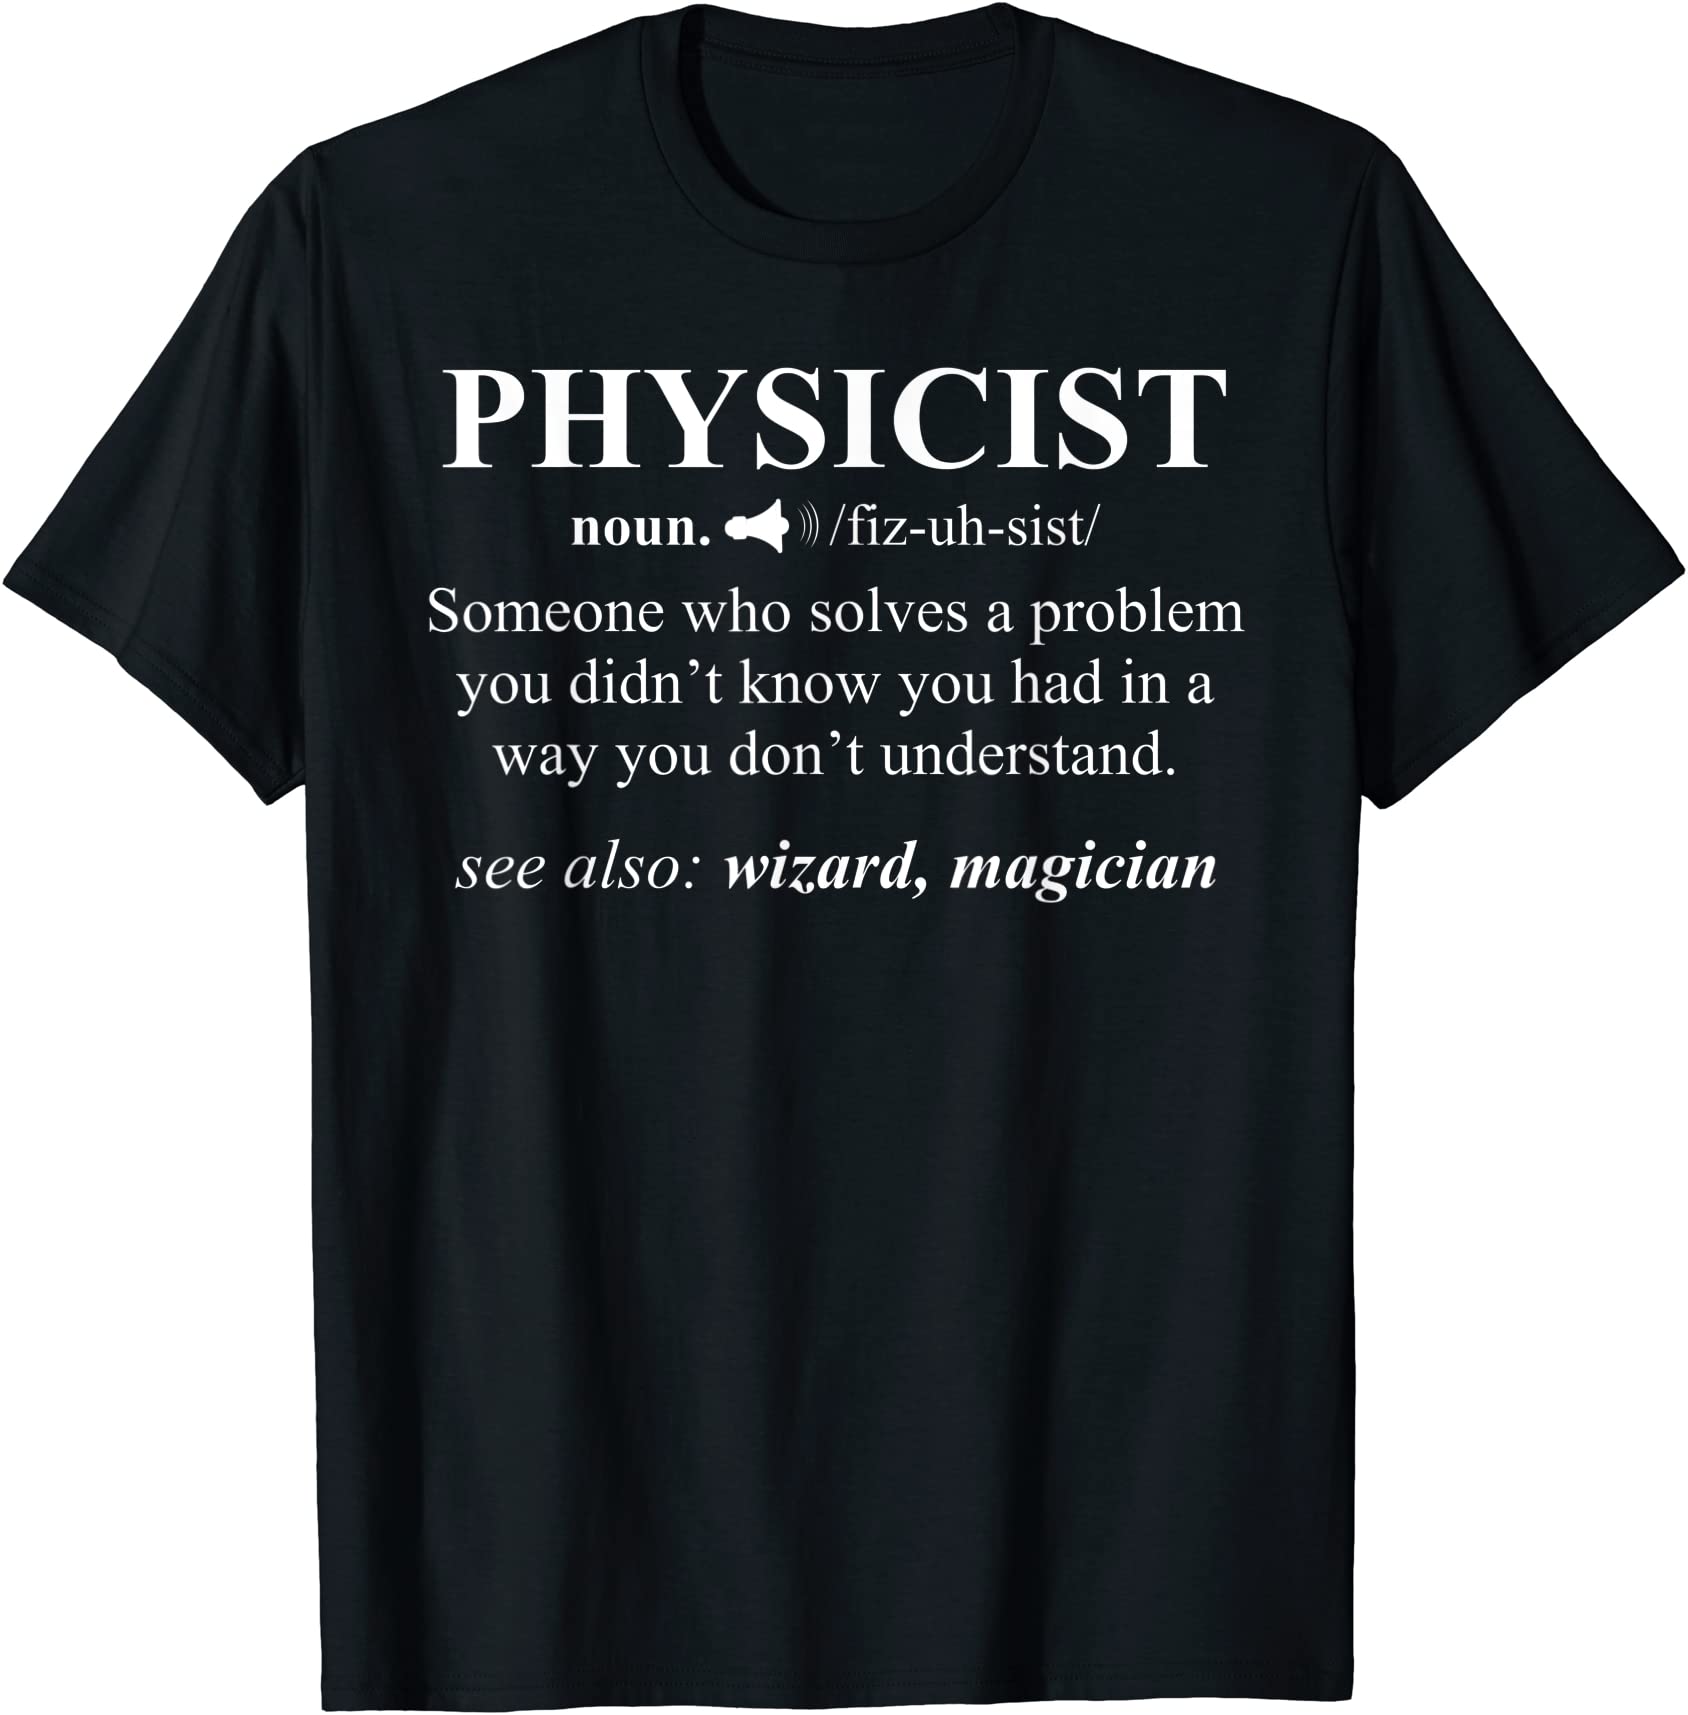 physicist definition wizard scientist physics t shirt funny men - Buy t ...